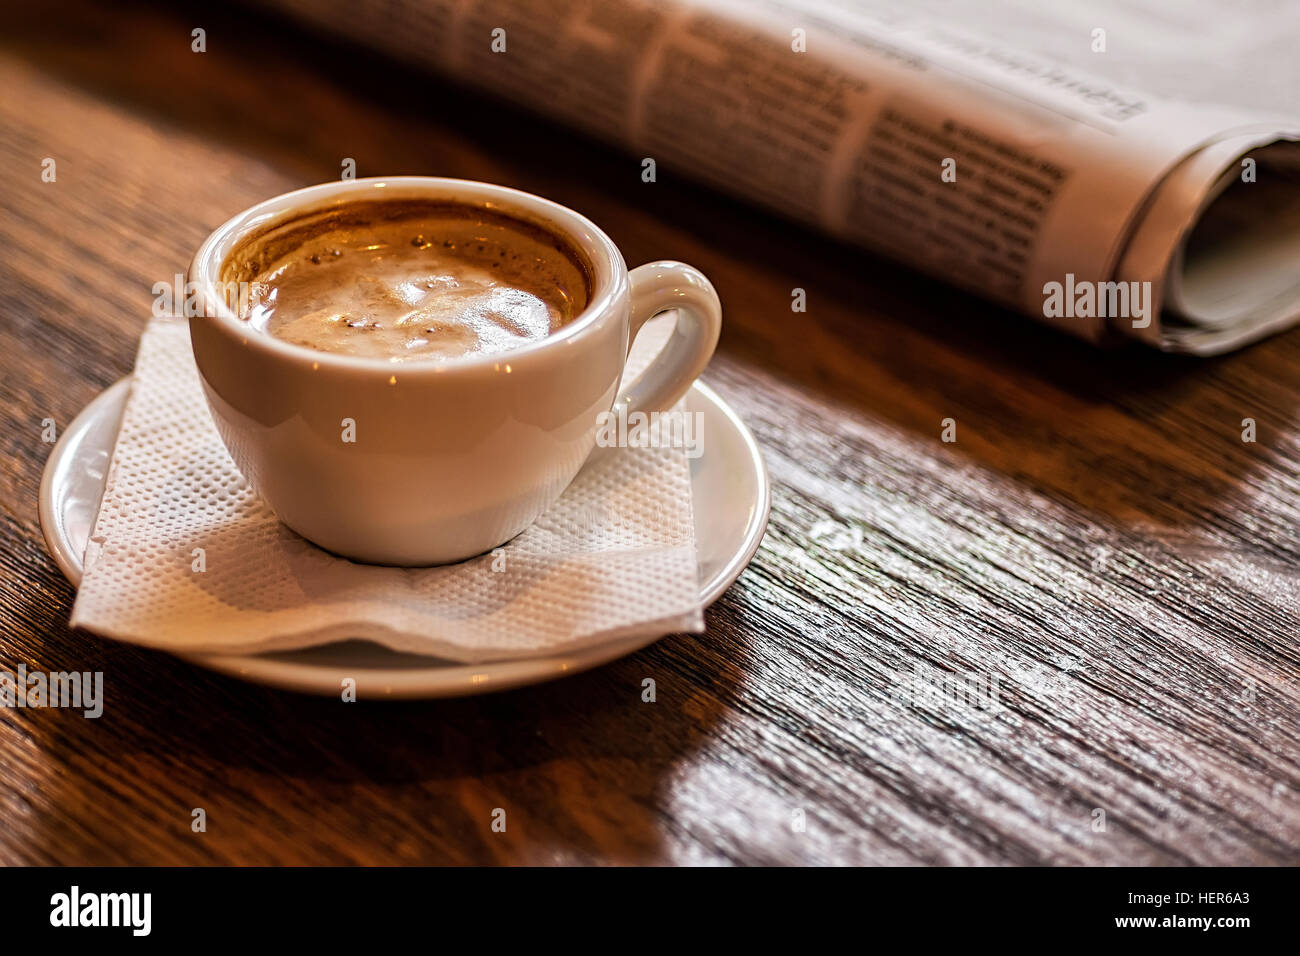 Coffee Cup and Newspaper on a Wooden Table. Good Morning or Coffee Break Concept. Stock Photo